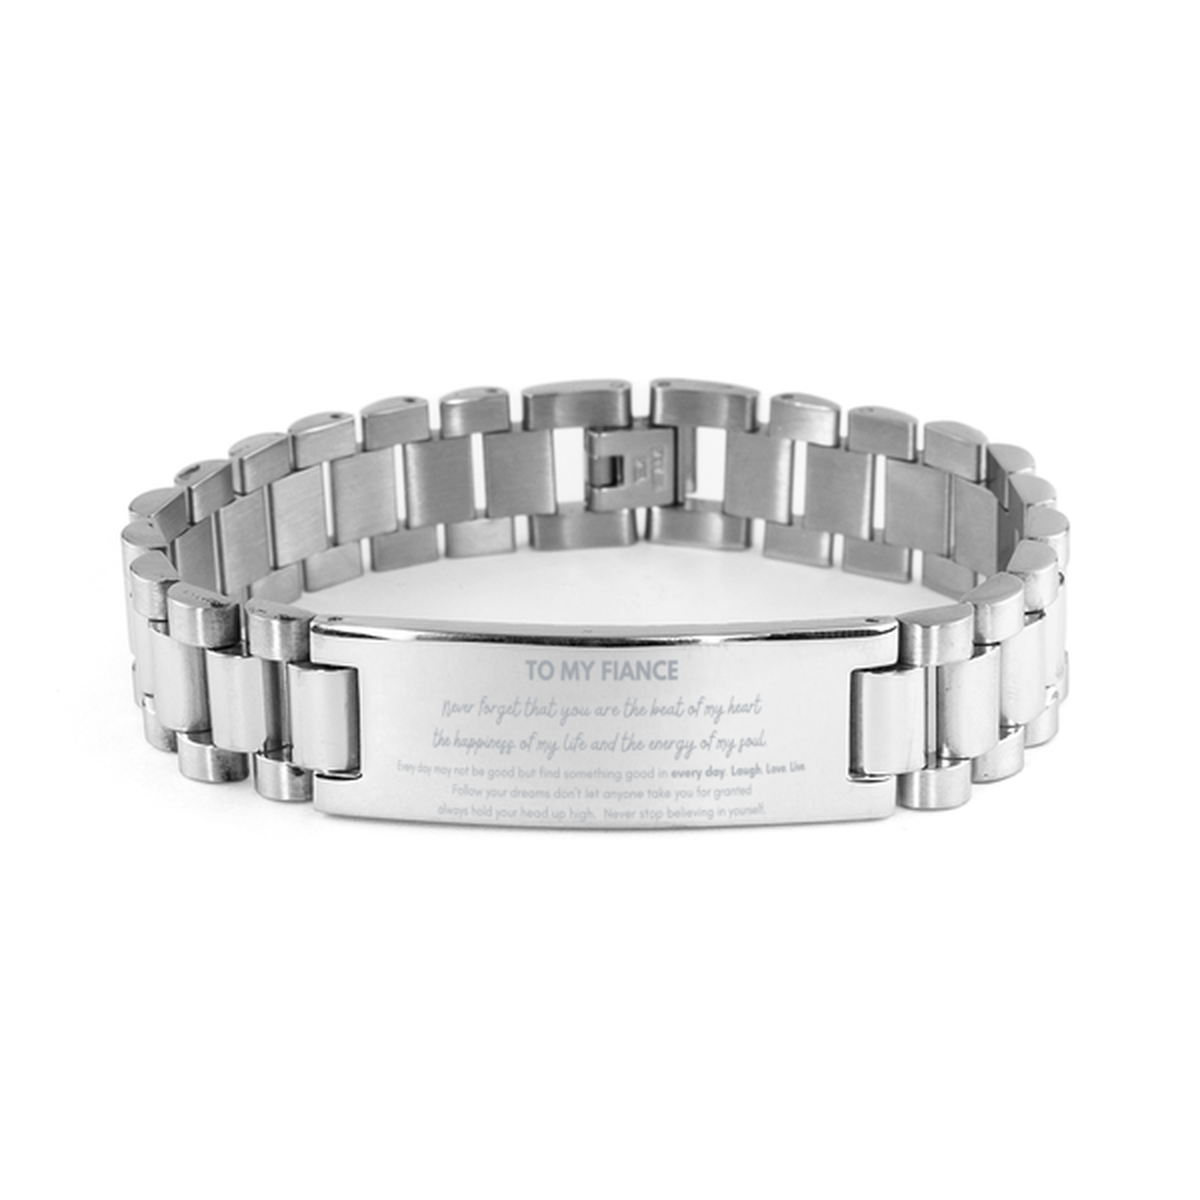 To My Fiance Bracelet Gifts, Christmas Fiance Ladder Stainless Steel Bracelet Present, Birthday Unique Motivational For Fiance, To My Fiance Never forget that you are the beat of my heart the happiness of my life and the energy of my soul